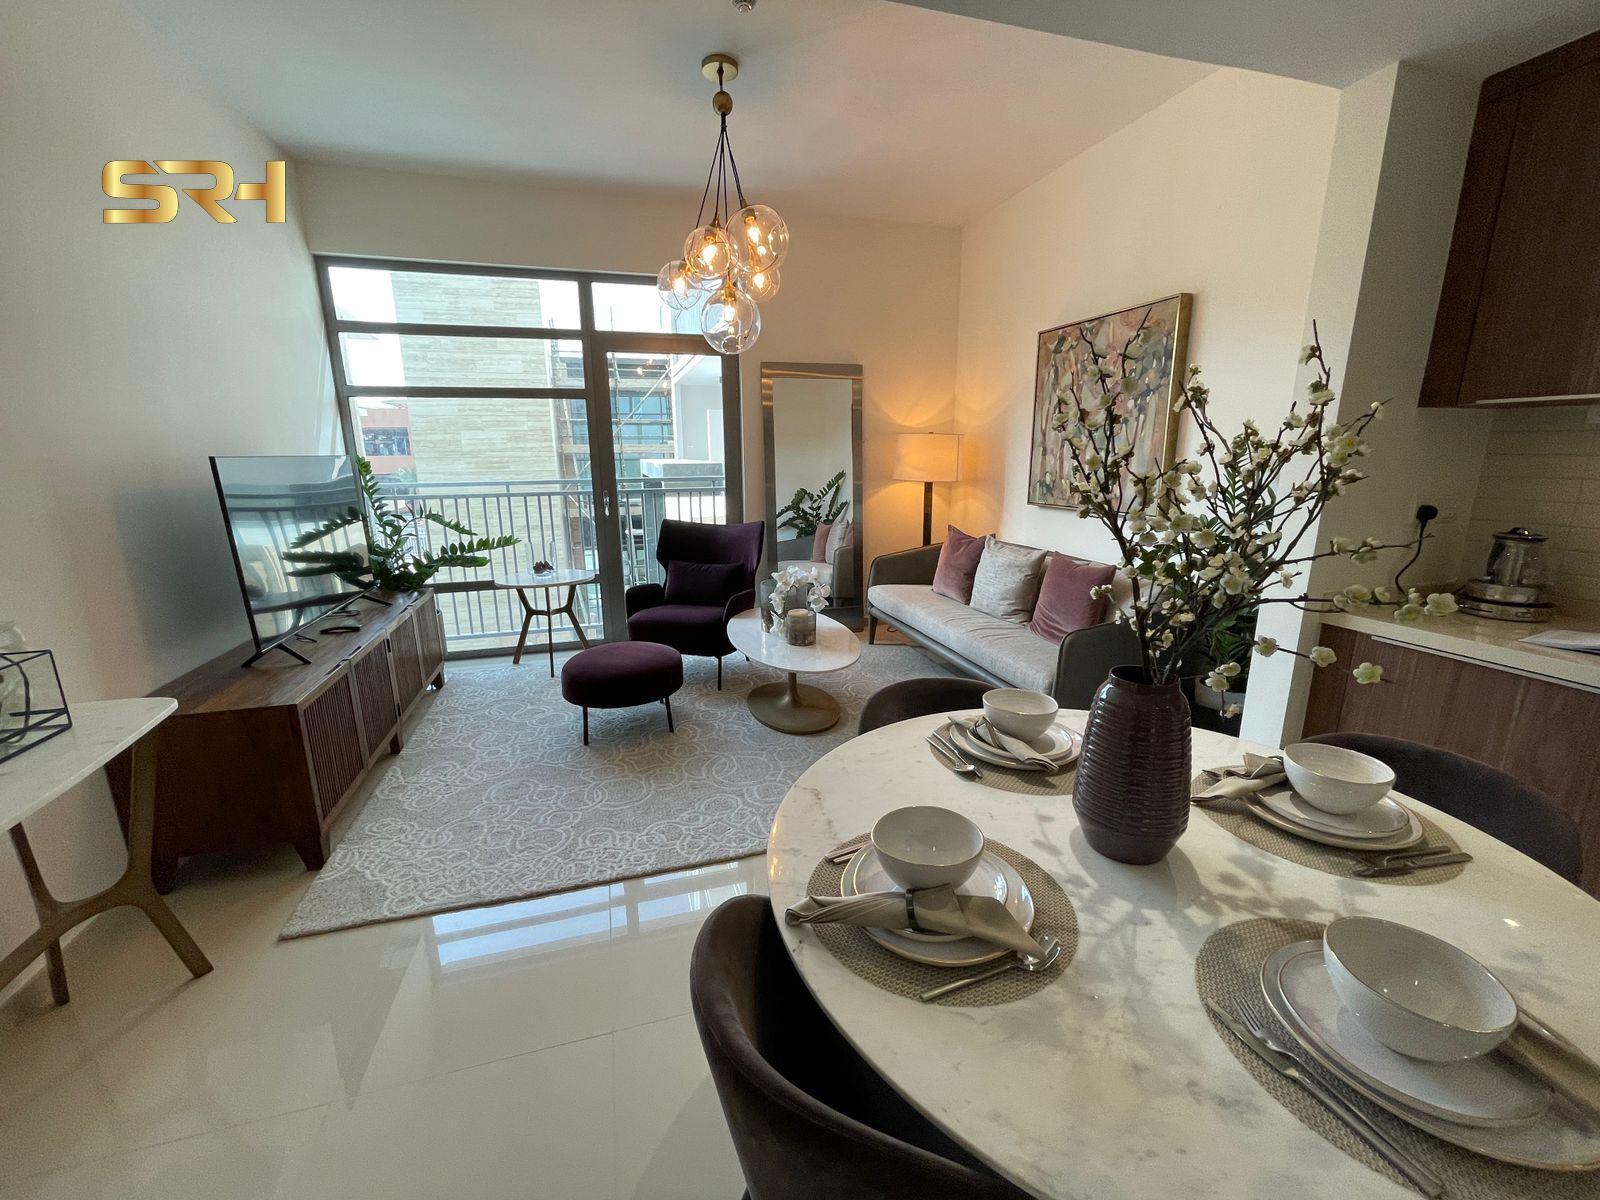 2 BR  Apartment For Sale in Muwailih Commercial, Sharjah - 5116929